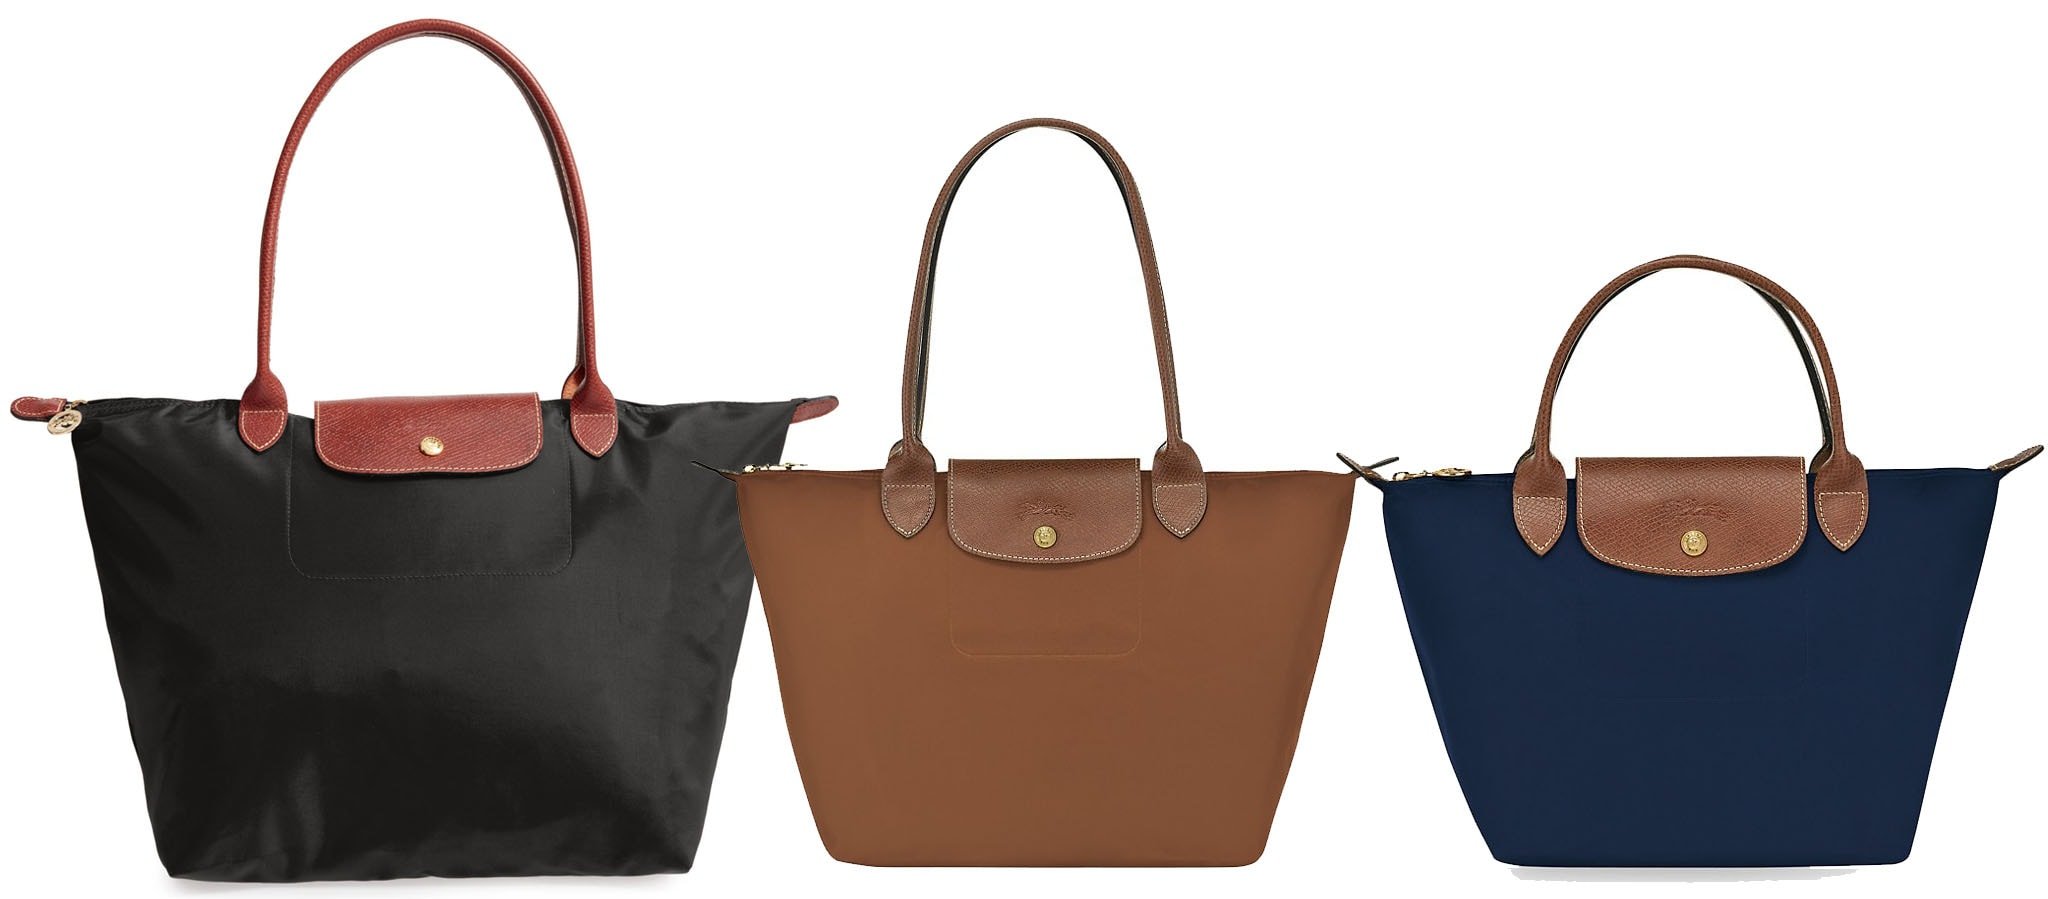 The Le Pliage is Longchamp's most popular bag style, made from nylon with embossed leather trims